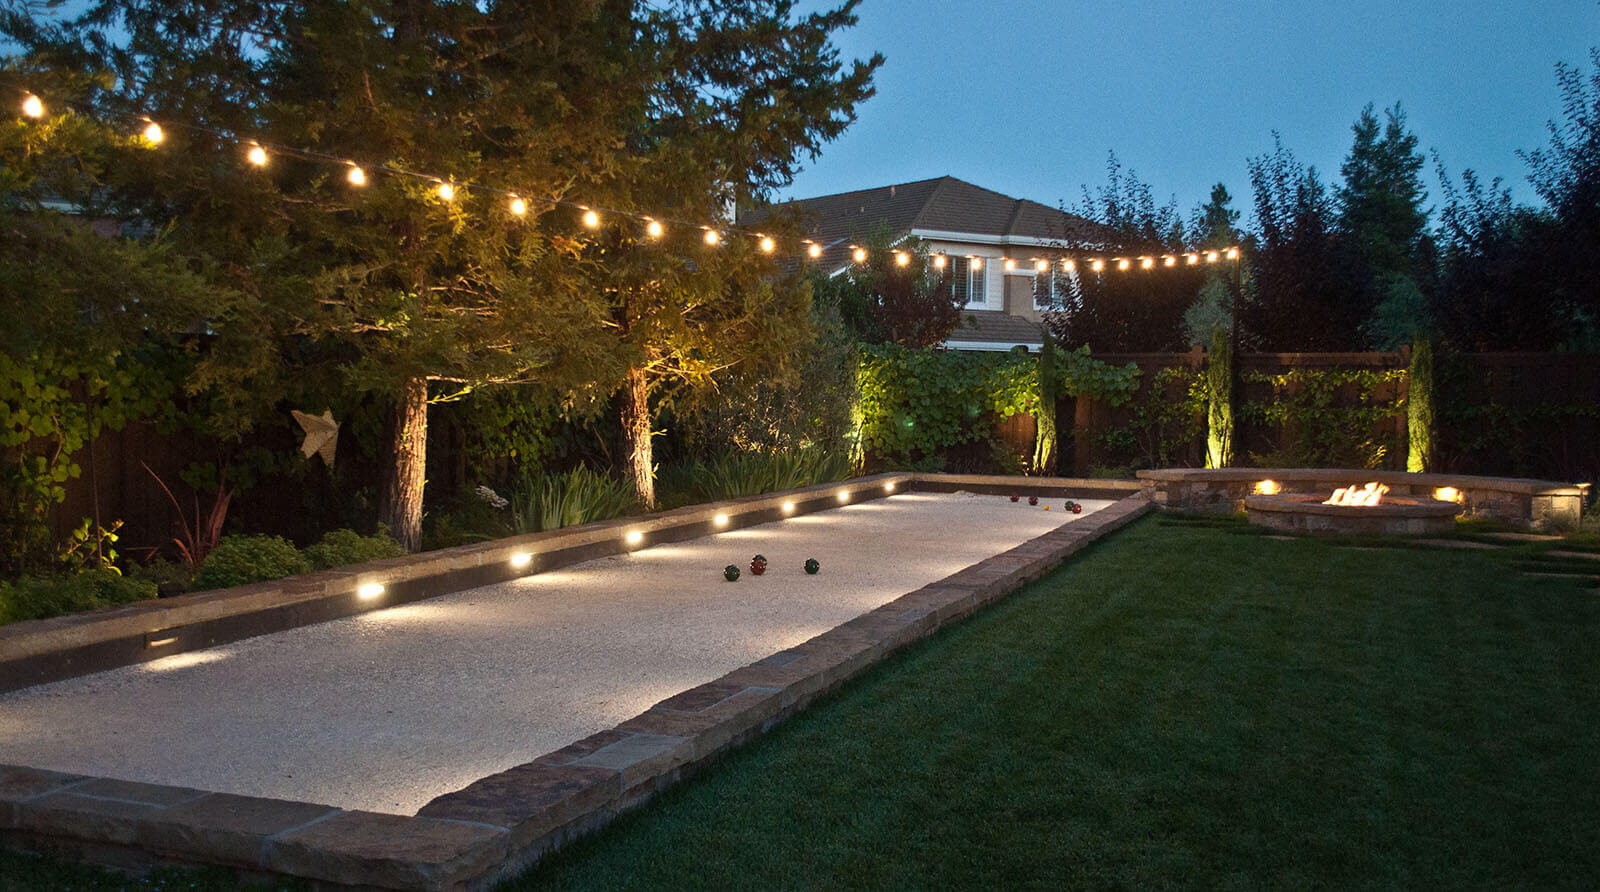 warmly lit, stone-lined bachi ball court, next to manicured lawn and fireplace with accent lighting under trees